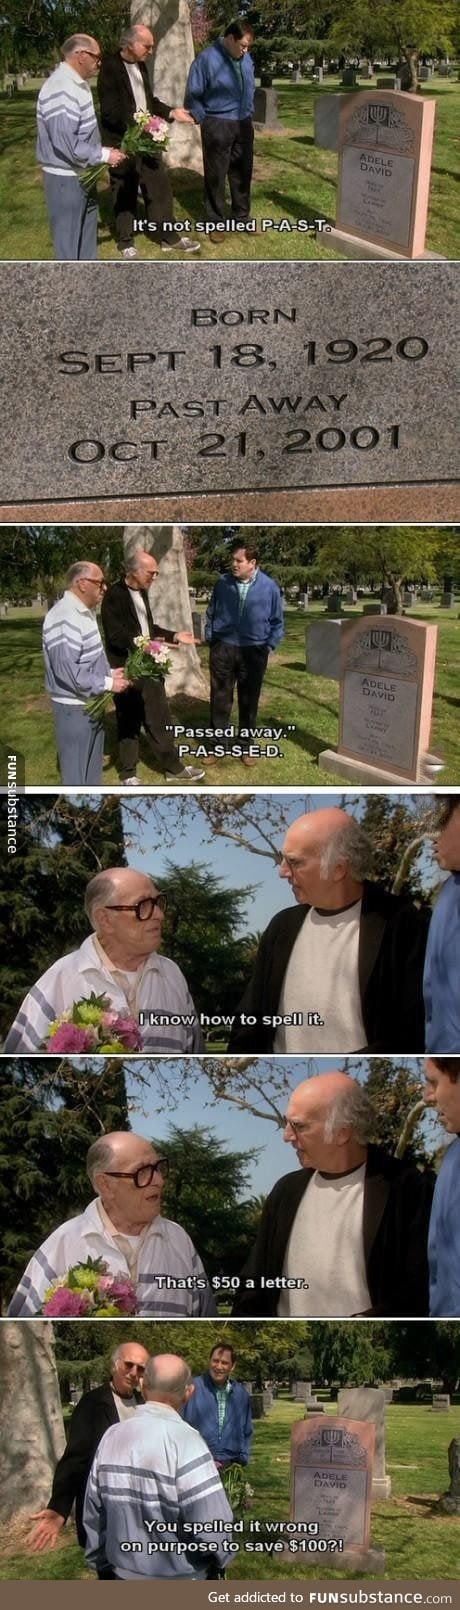 I love this show [Curb Your Enthusiasm]